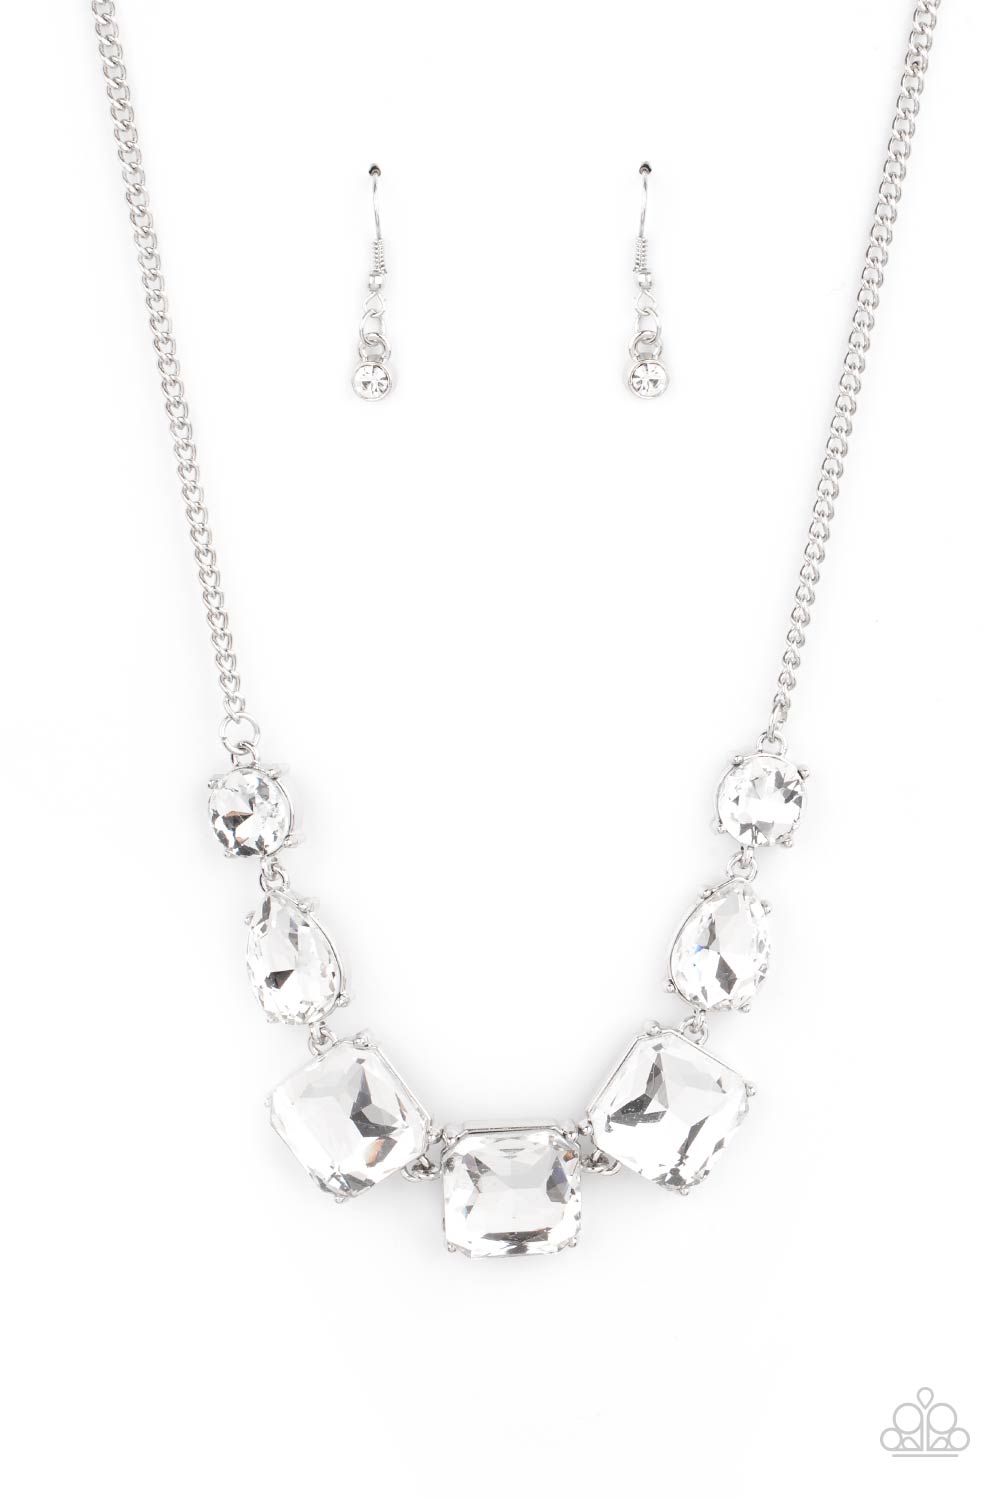 Unfiltered Confidence - White ***COMING SOON*** - Bling With Crystal